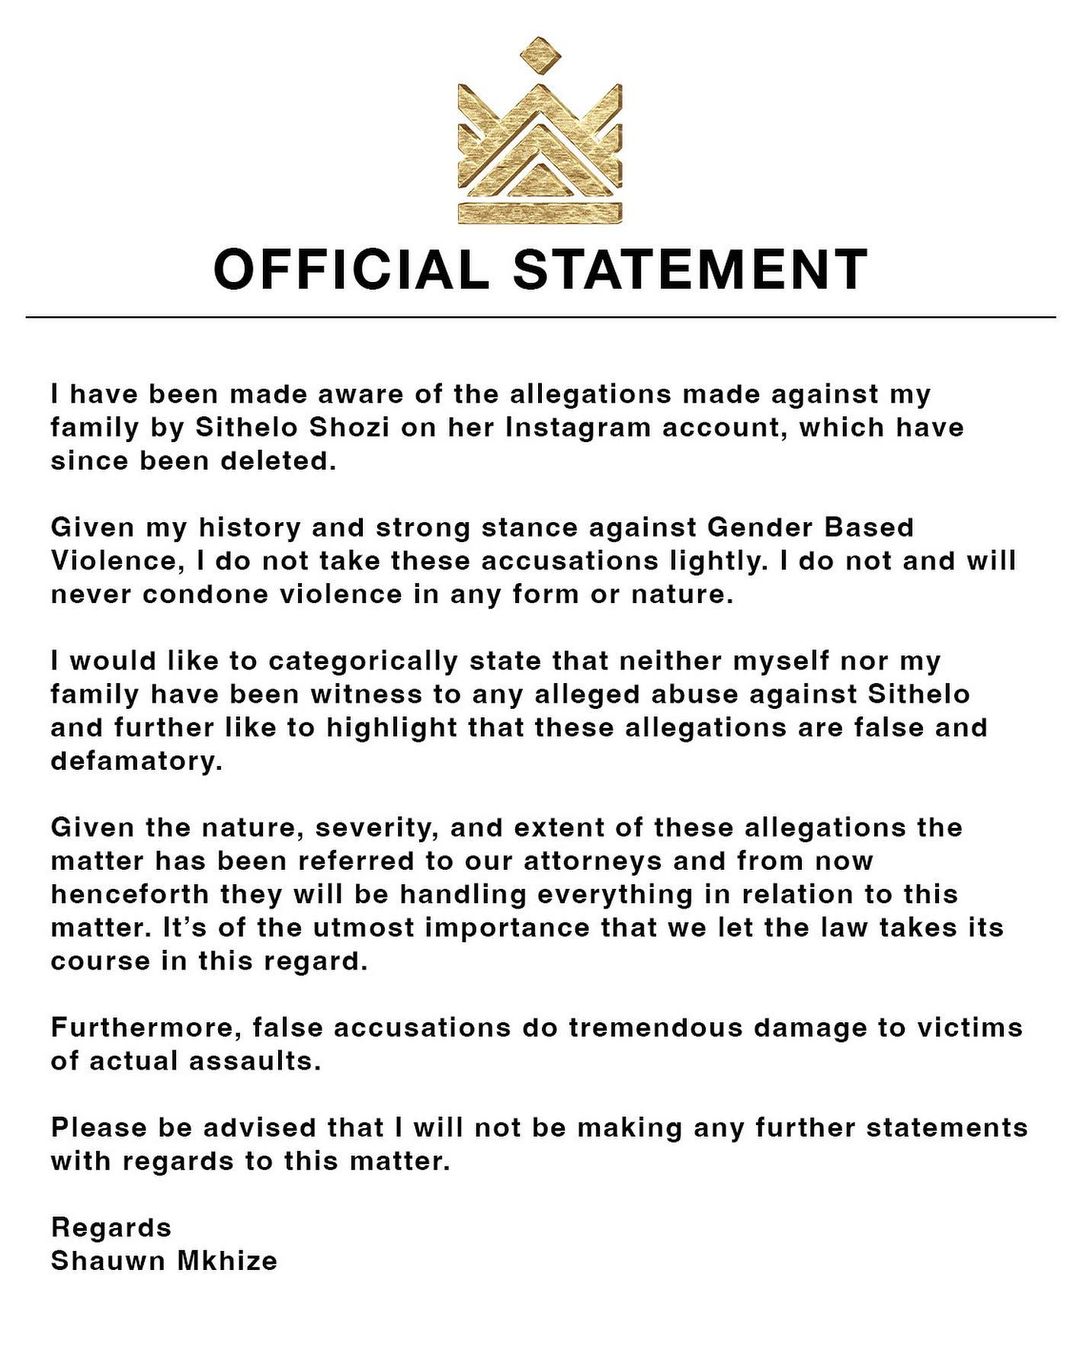 Shauwn Mkhize's statement about Sithelo's allegations. 